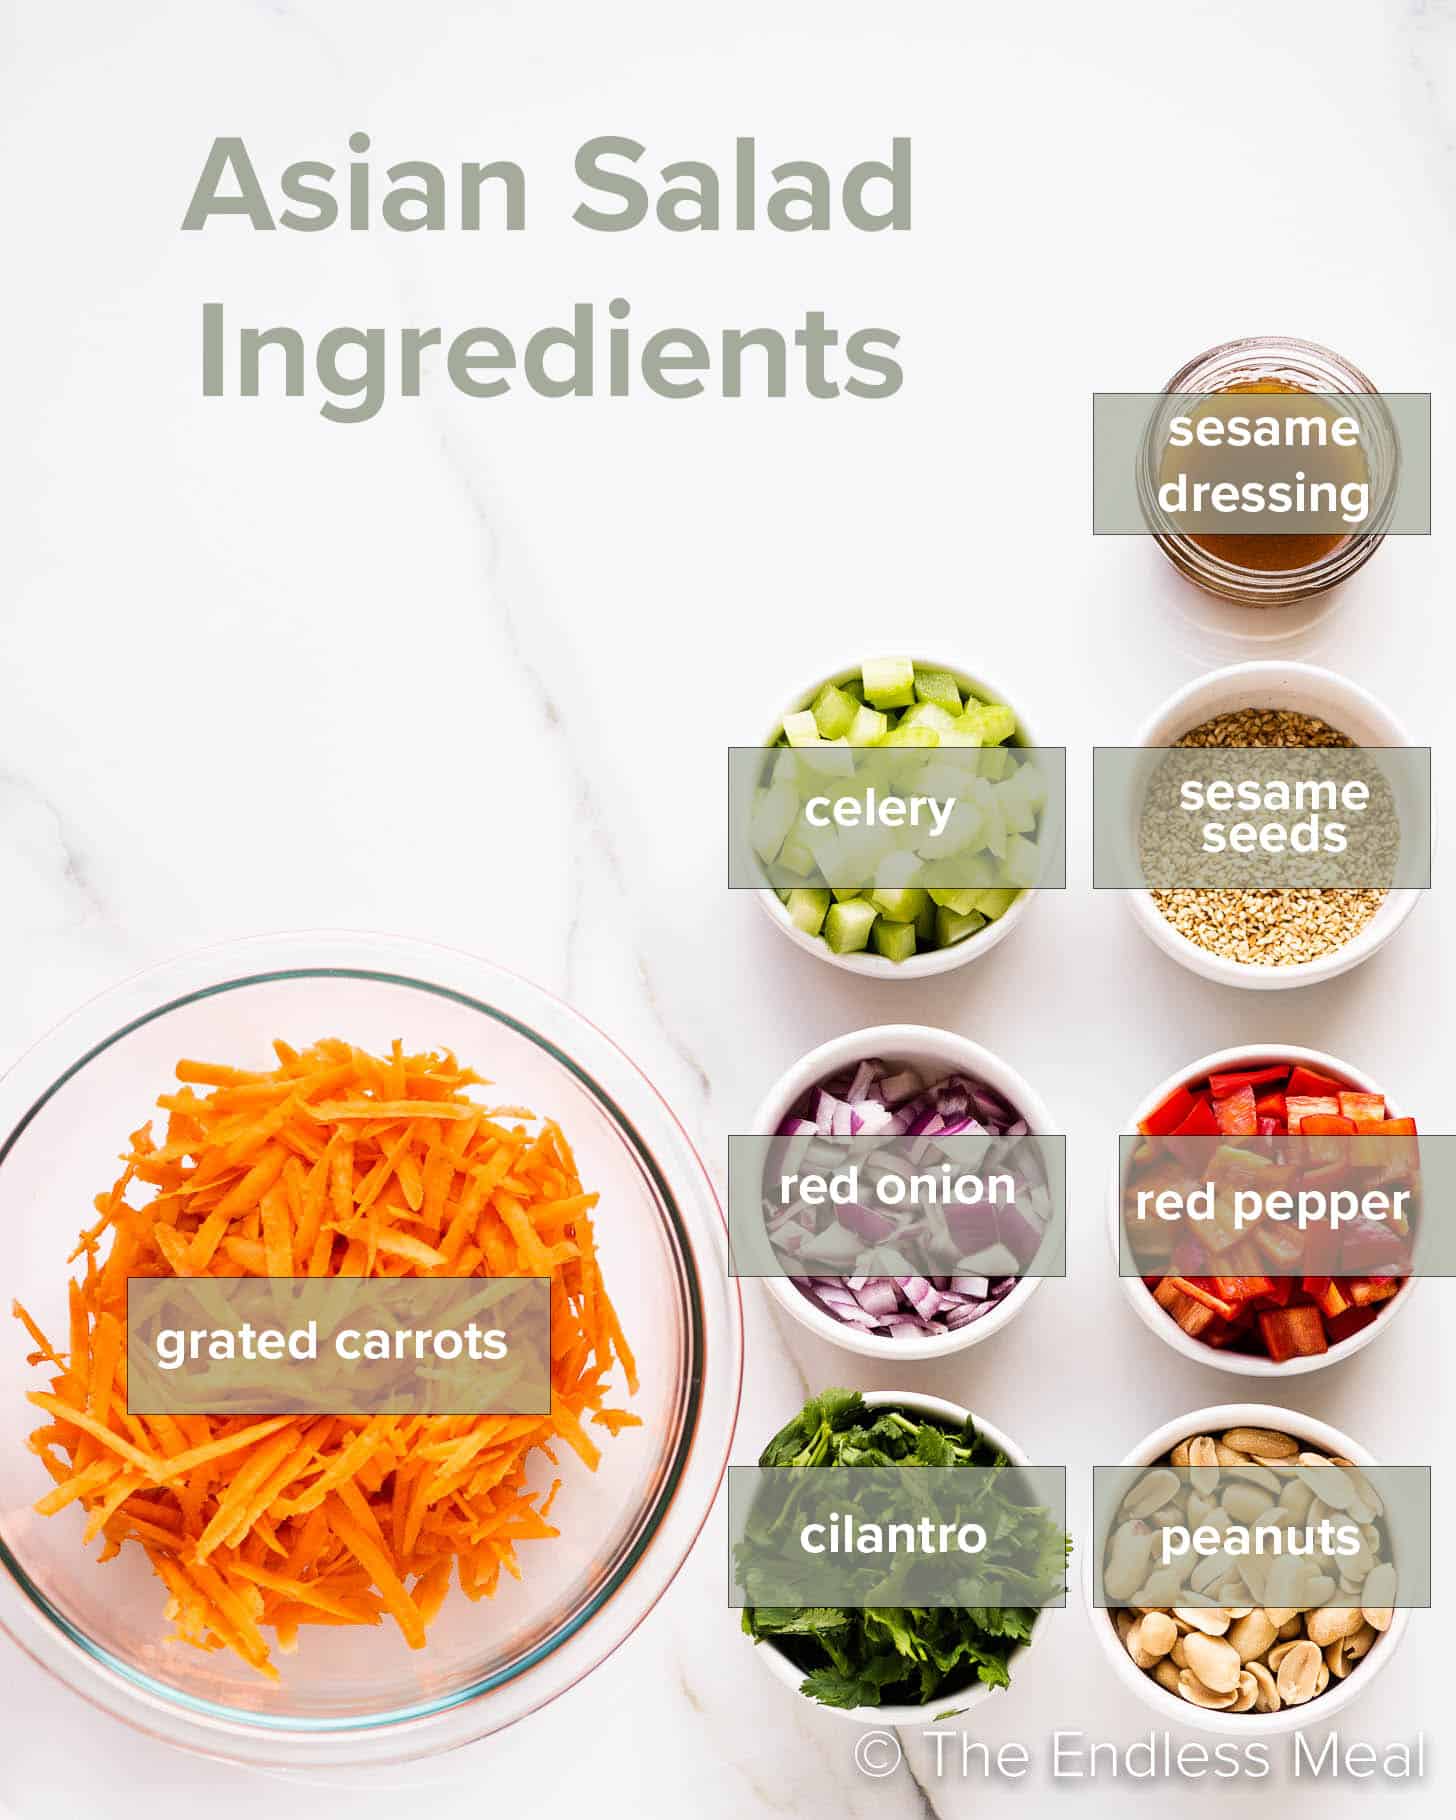 the ingredients needed to make this Asian Salad Recipe